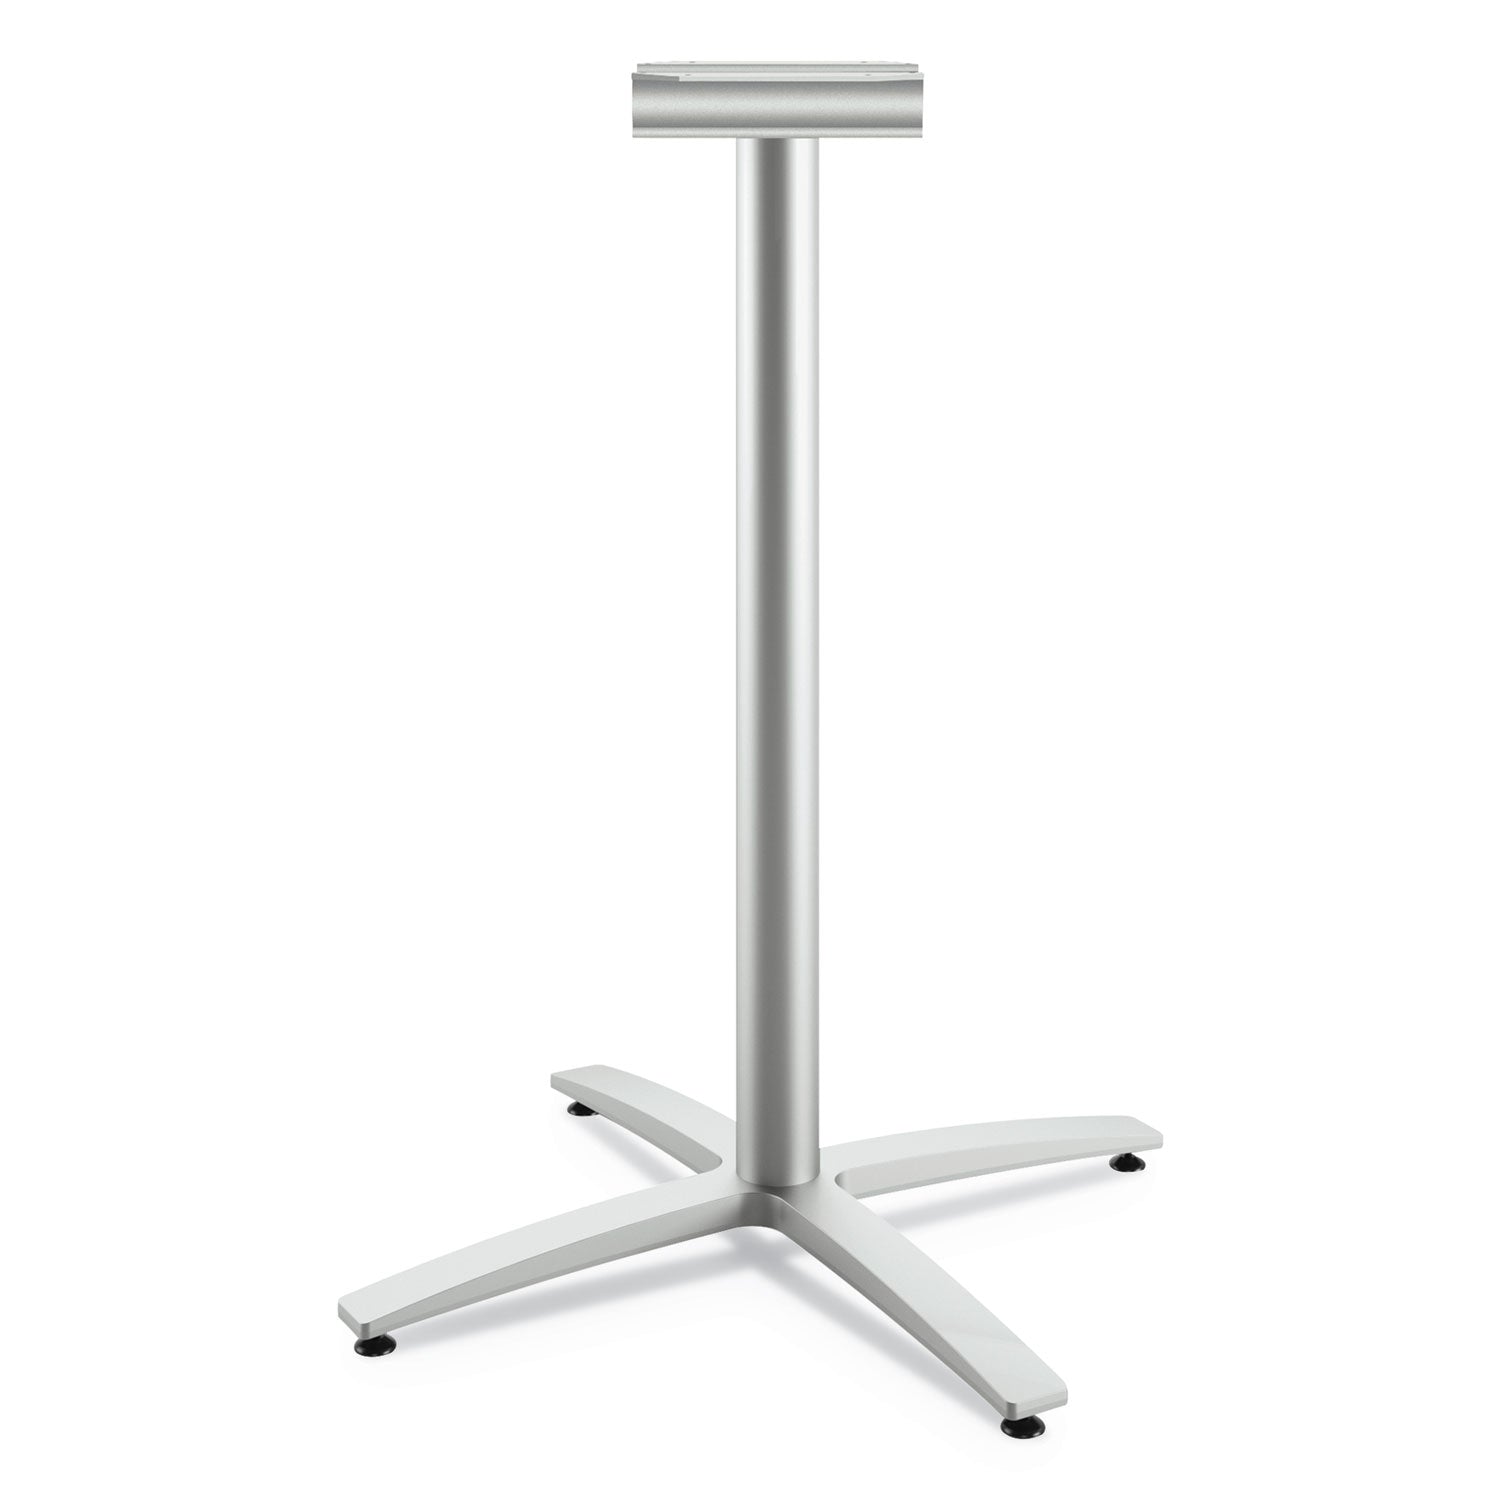 between-standing-height-x-base-for-30-to-36-table-tops-2618w-x-4112h-silver_honbtx42spr8 - 1